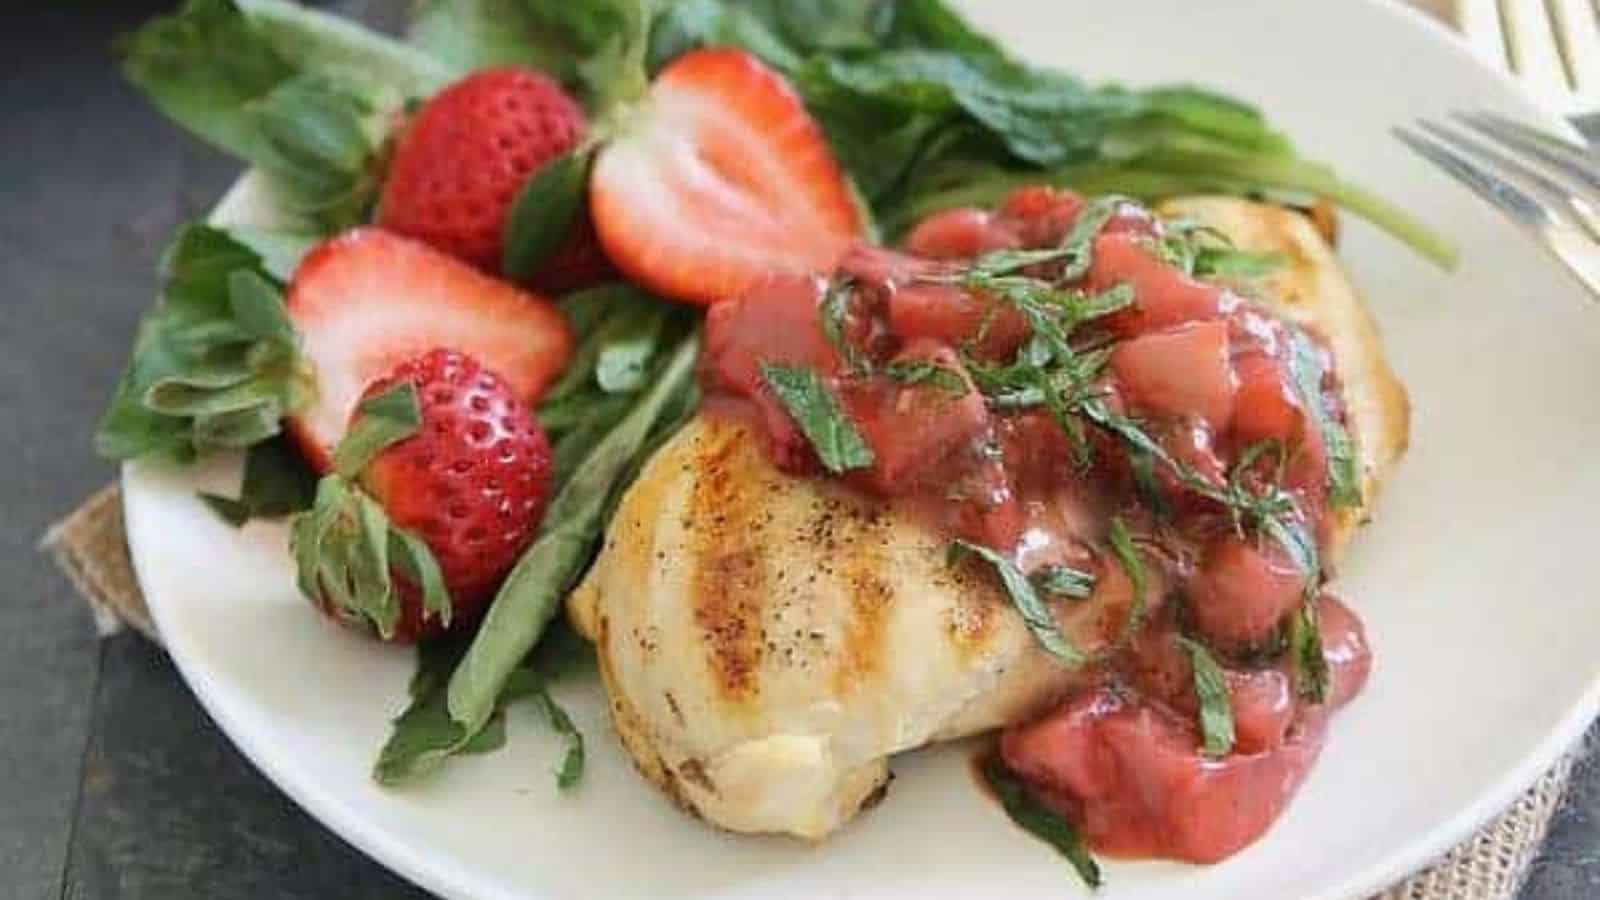 Grilled chicken on a plate with strawberry basil sauce, fresh cut strawberries and greens.